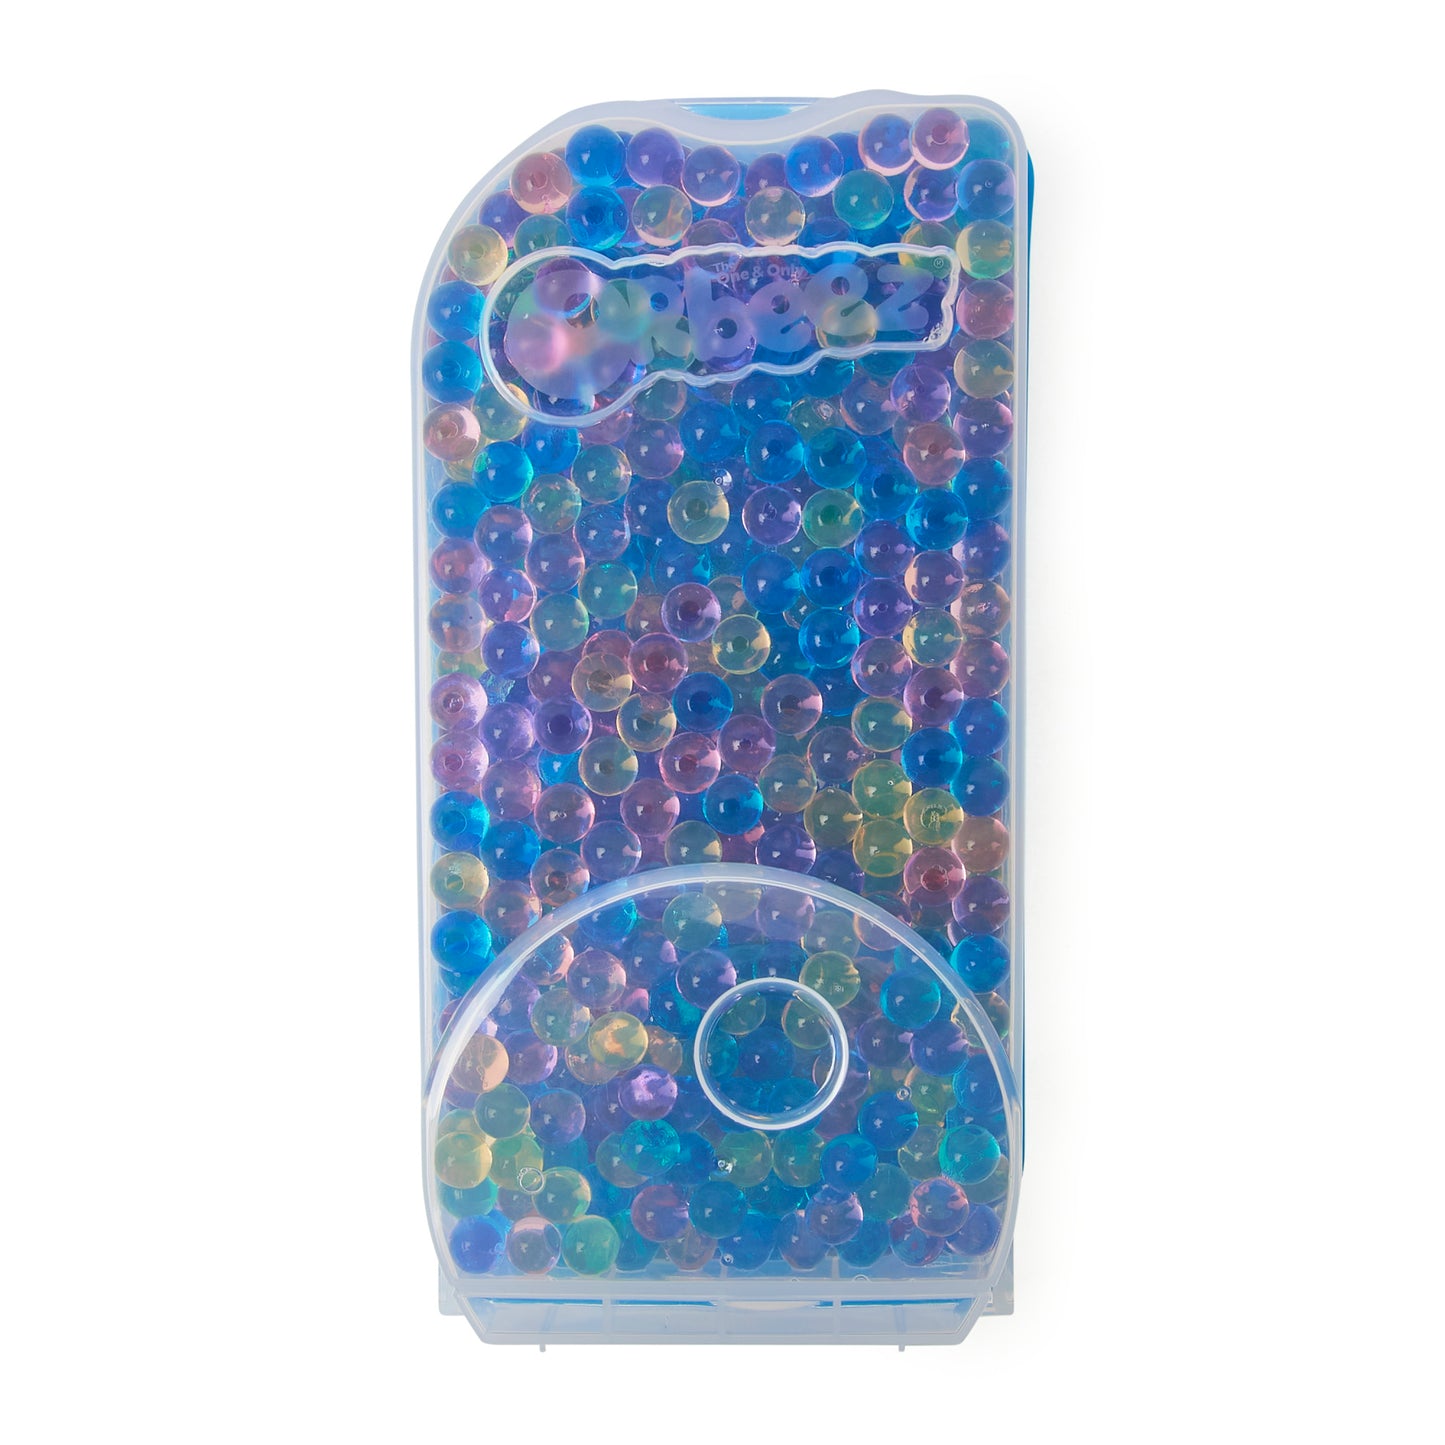 Orbeez Water Beads, The One and Only, Multi-Colored Shimmer Feature Pack with 1,300 Fully Grown Orbeez, Sensory Toy for Kids Ages 5 and up